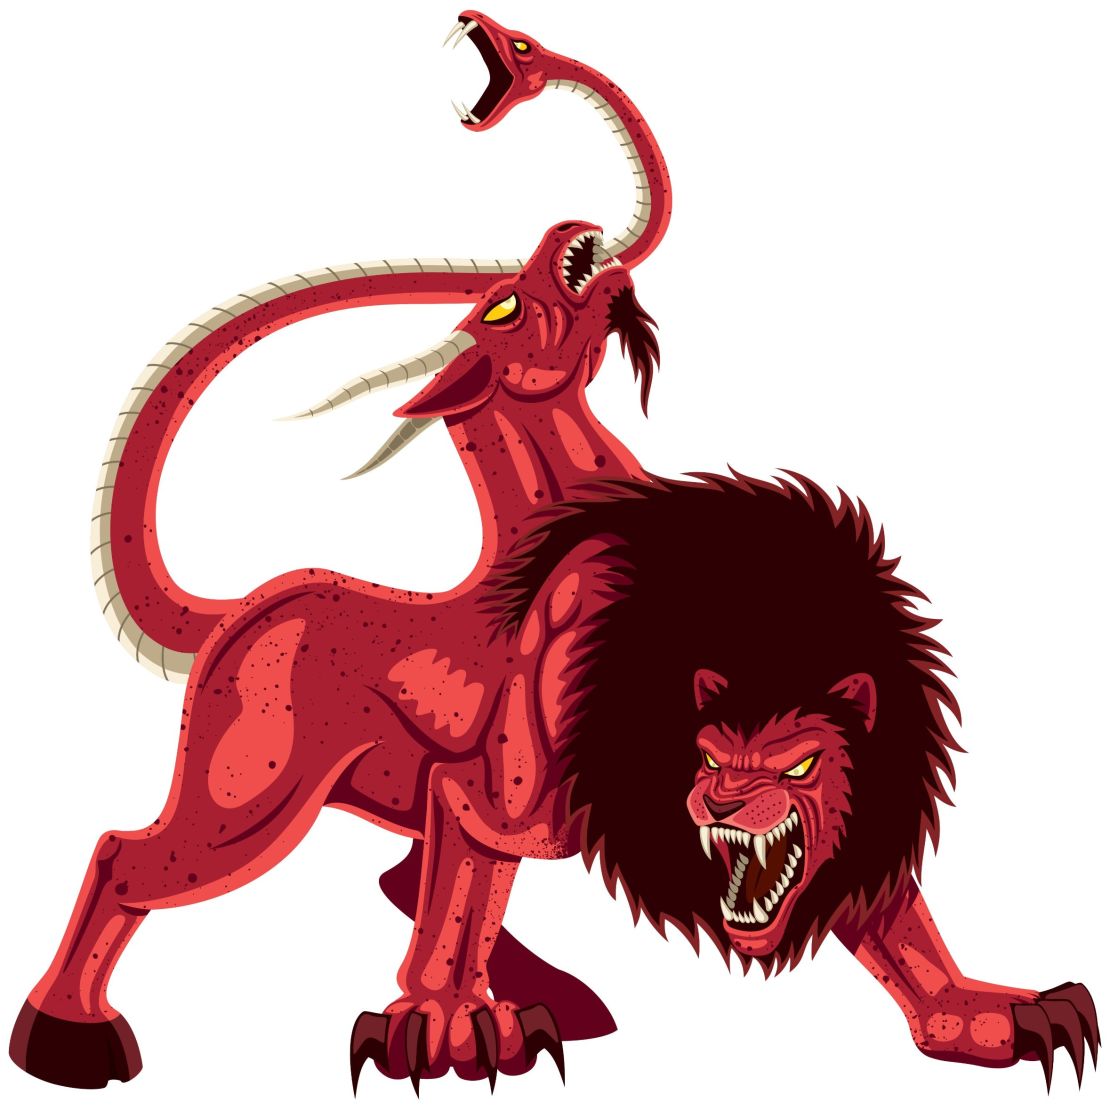 A Chimera is a mythical Greek creature made of many animals.